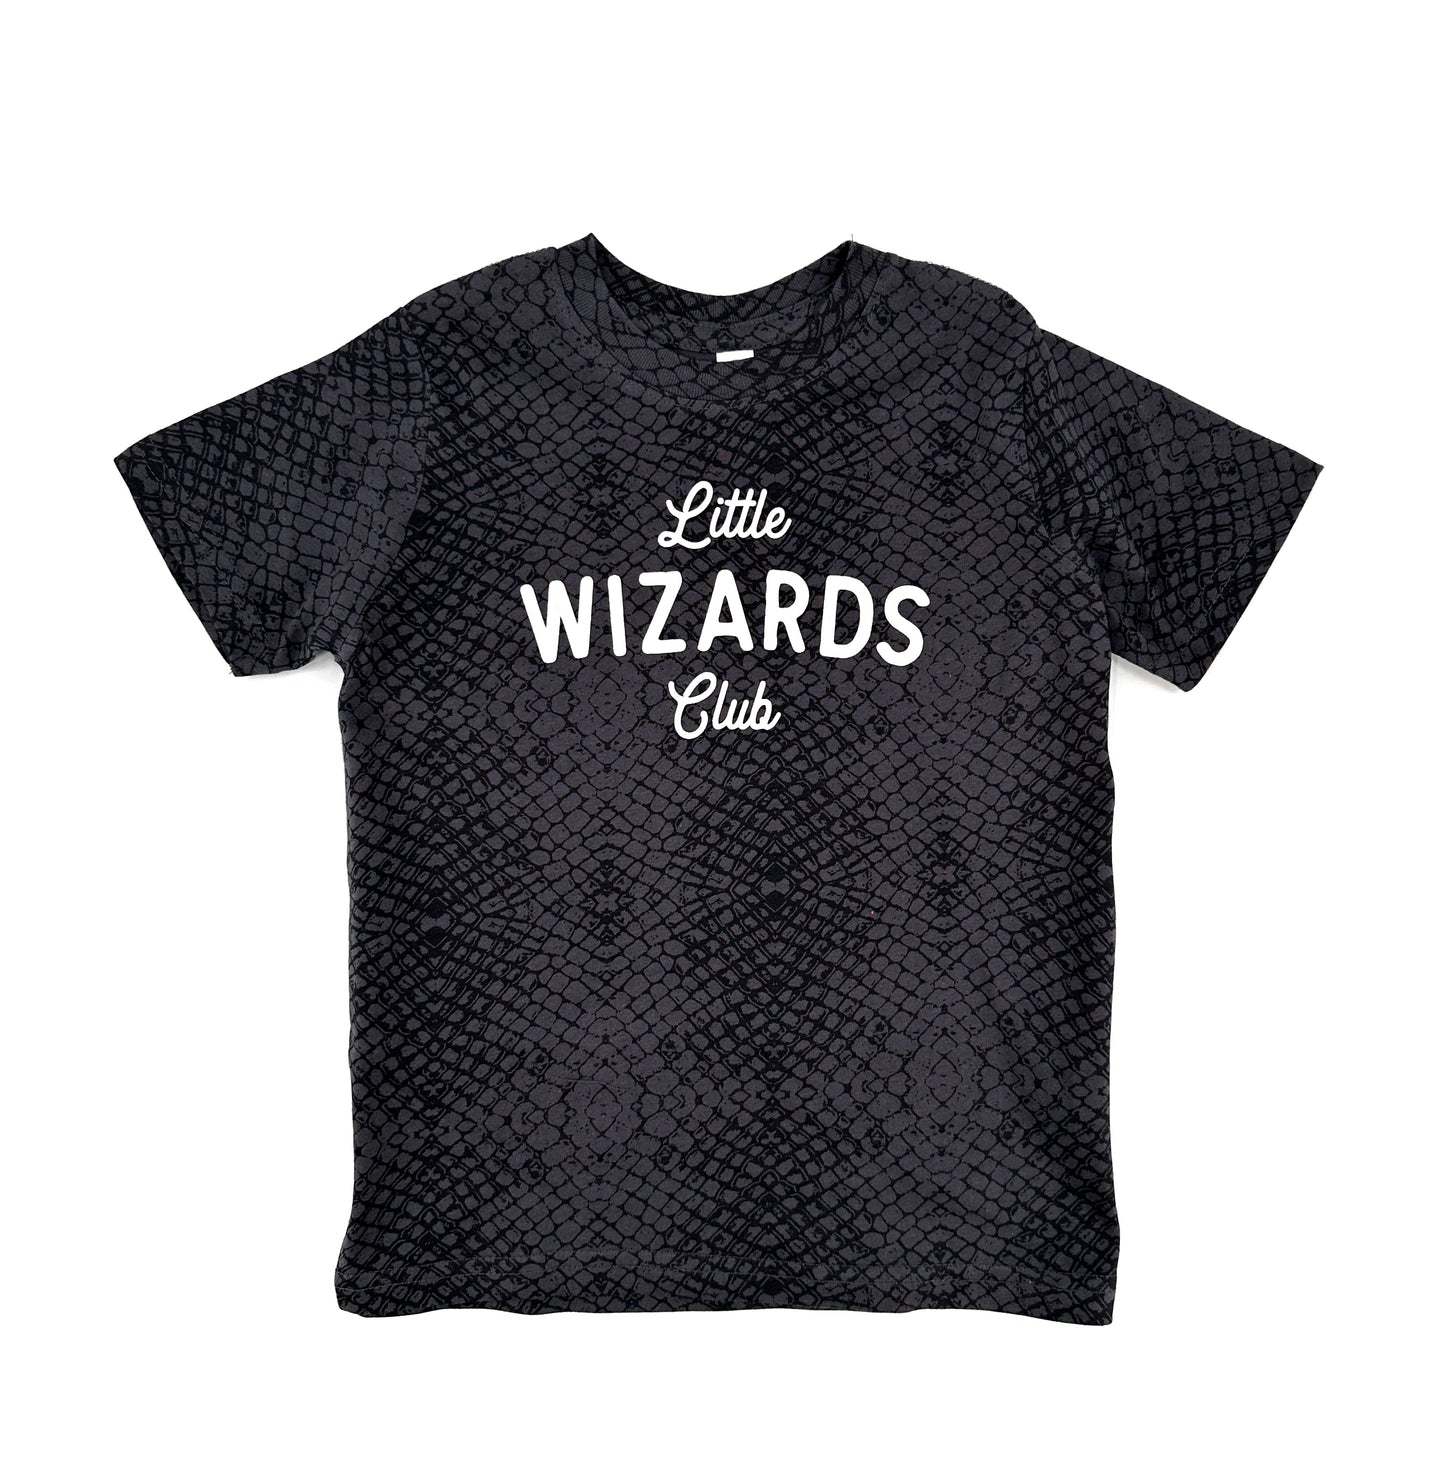 The Little Wizards Club, reptile printed tee